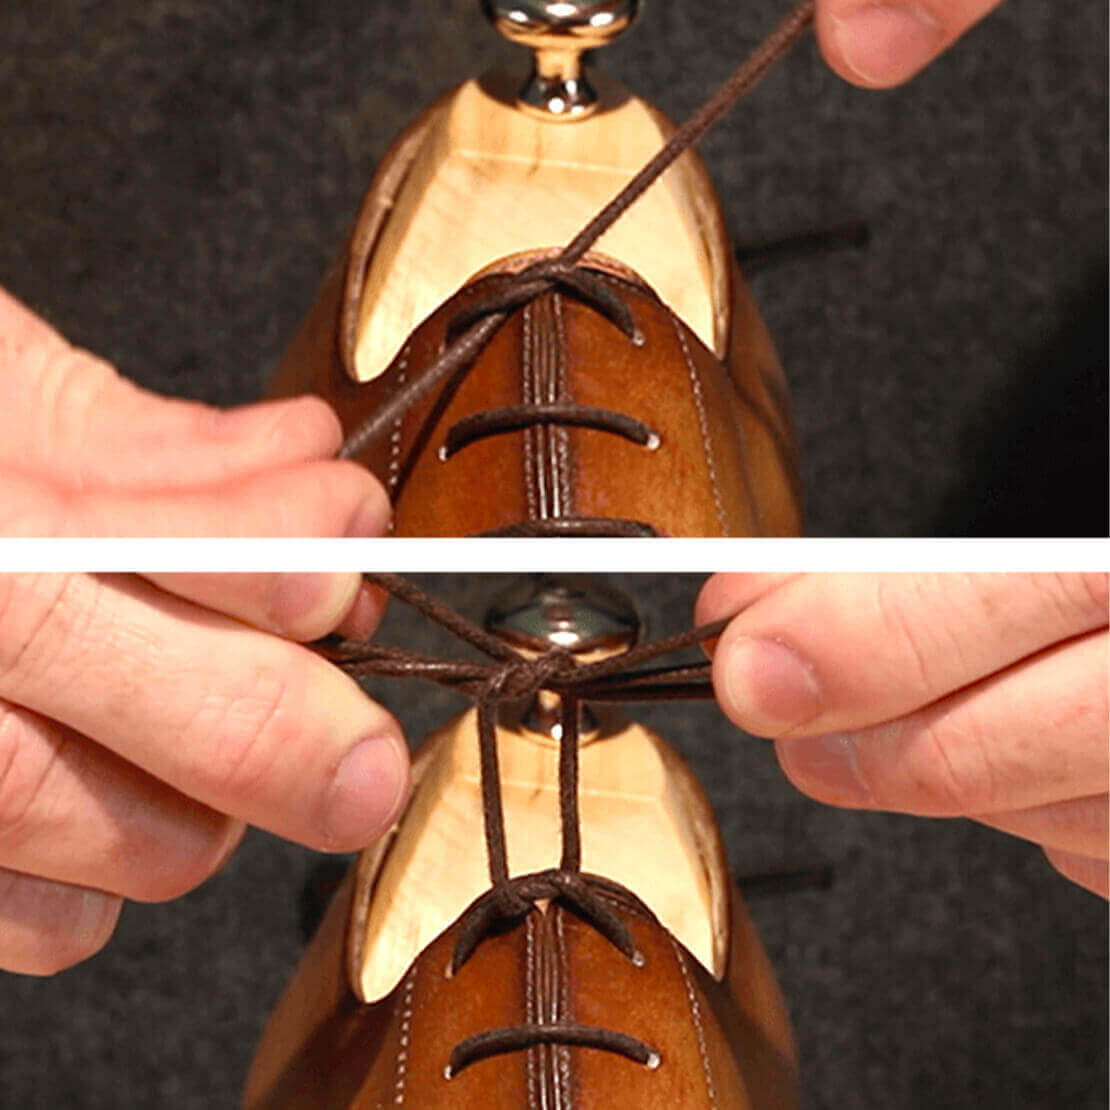 How to tie shoelaces elegantly by Monsieur Chaussure